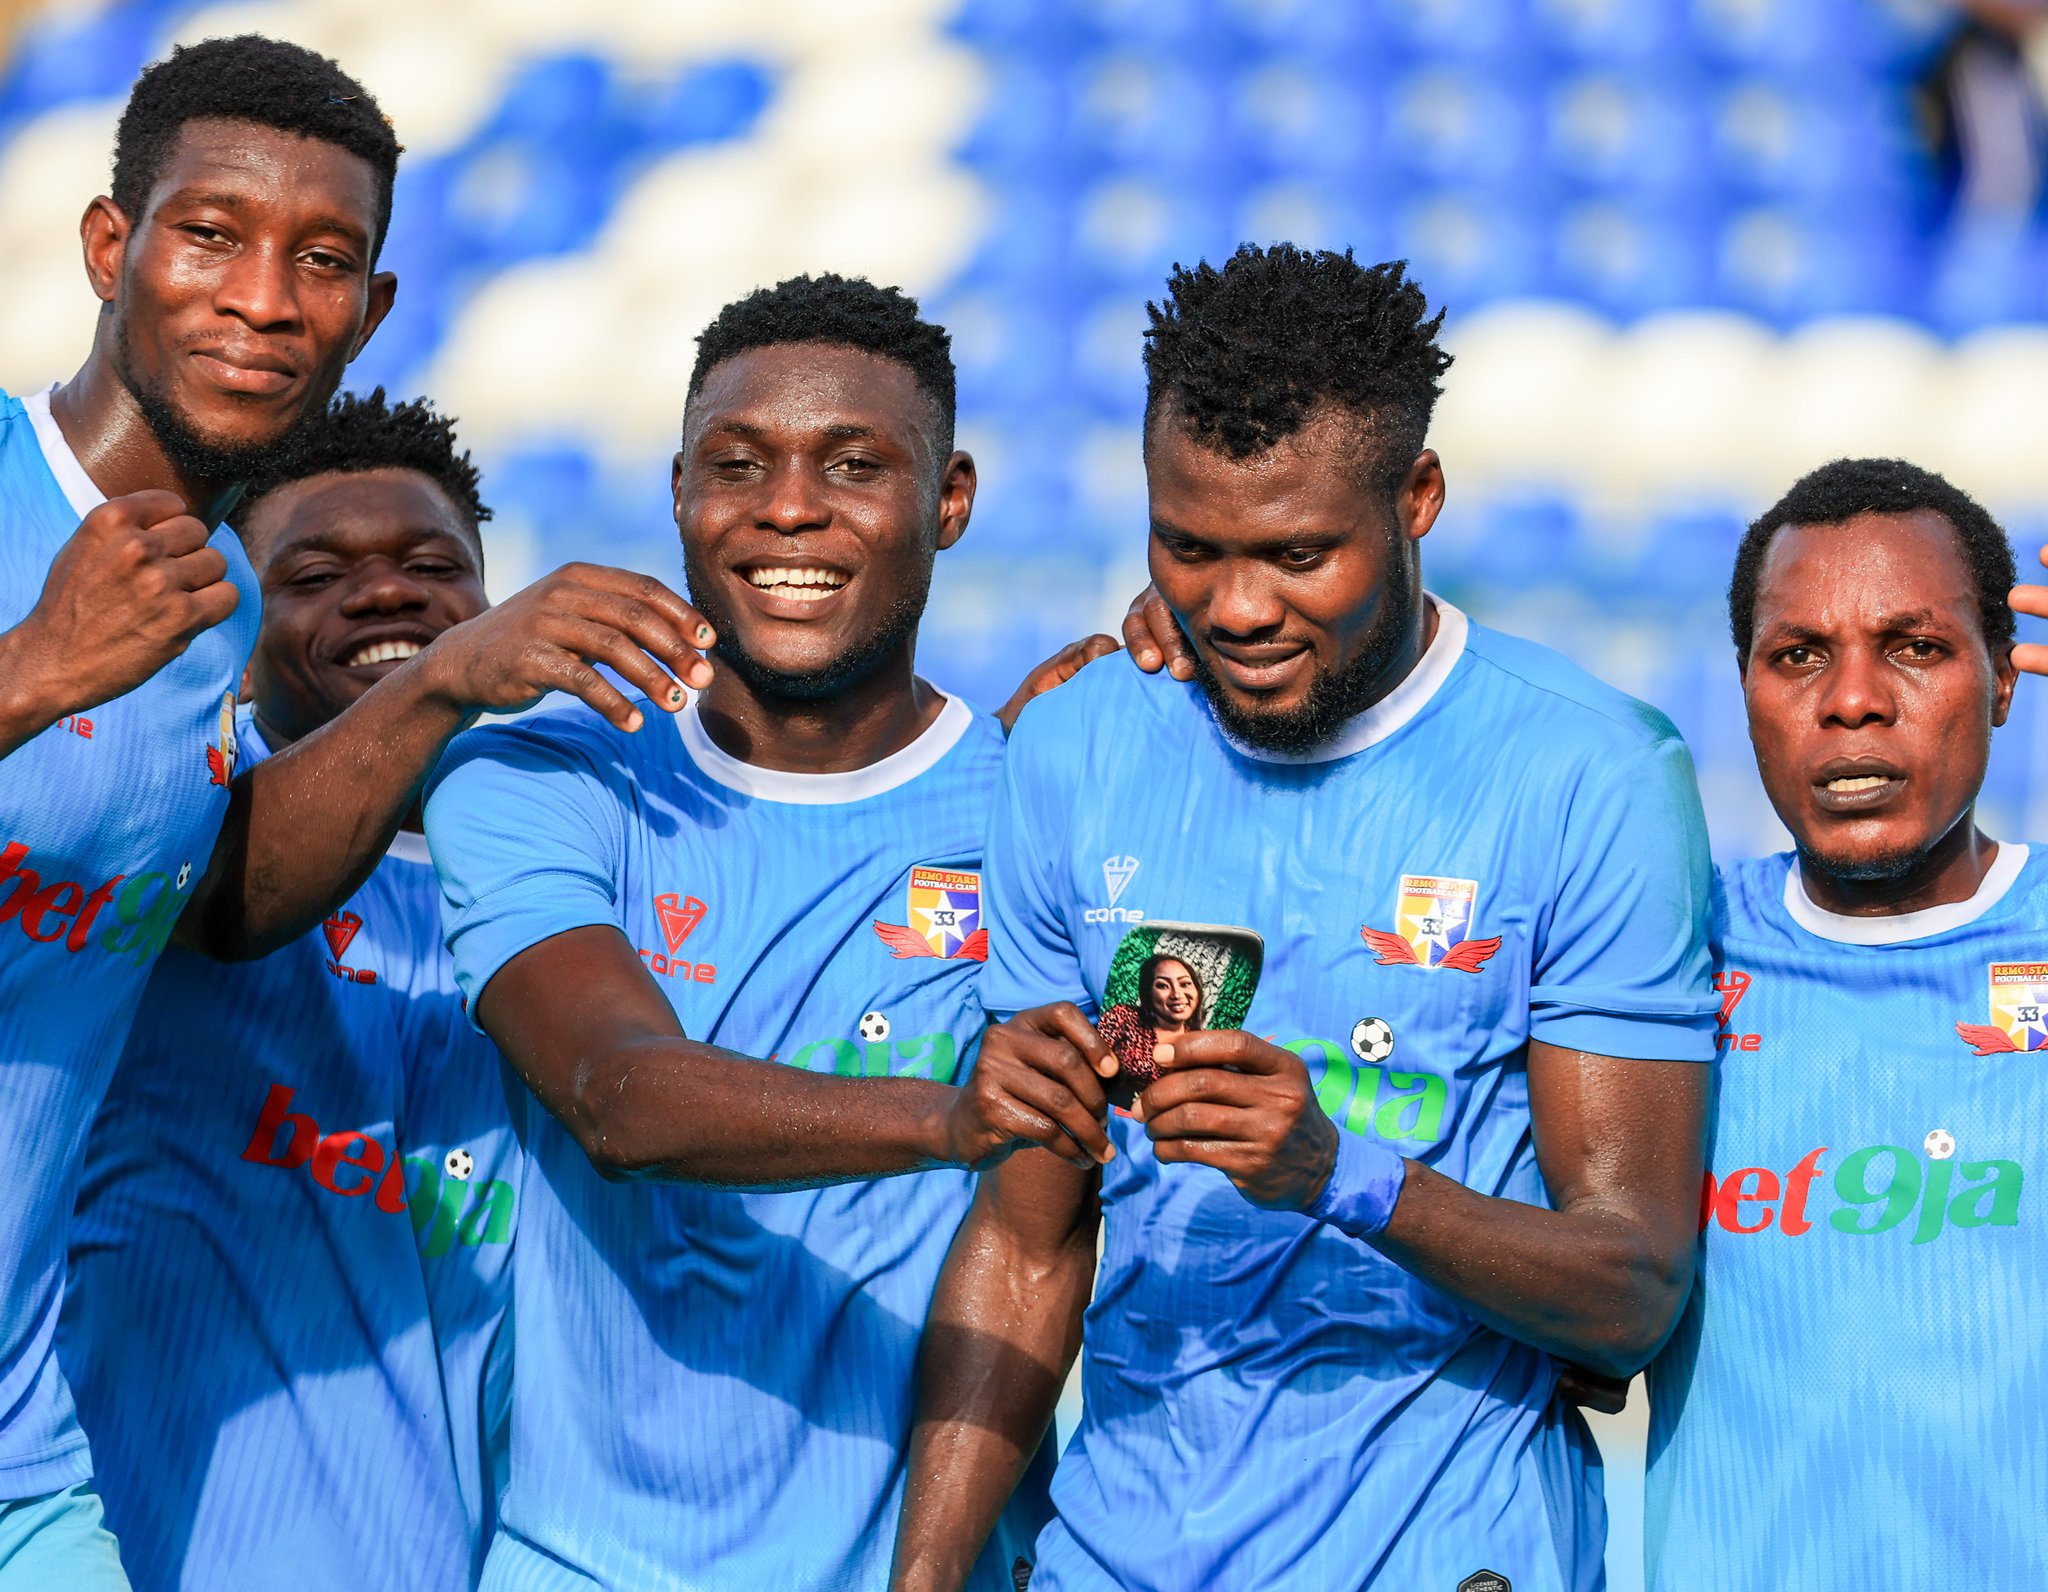 NPFL Matchday 6: How Remo Stars humbled Shooting Stars in South West Derby